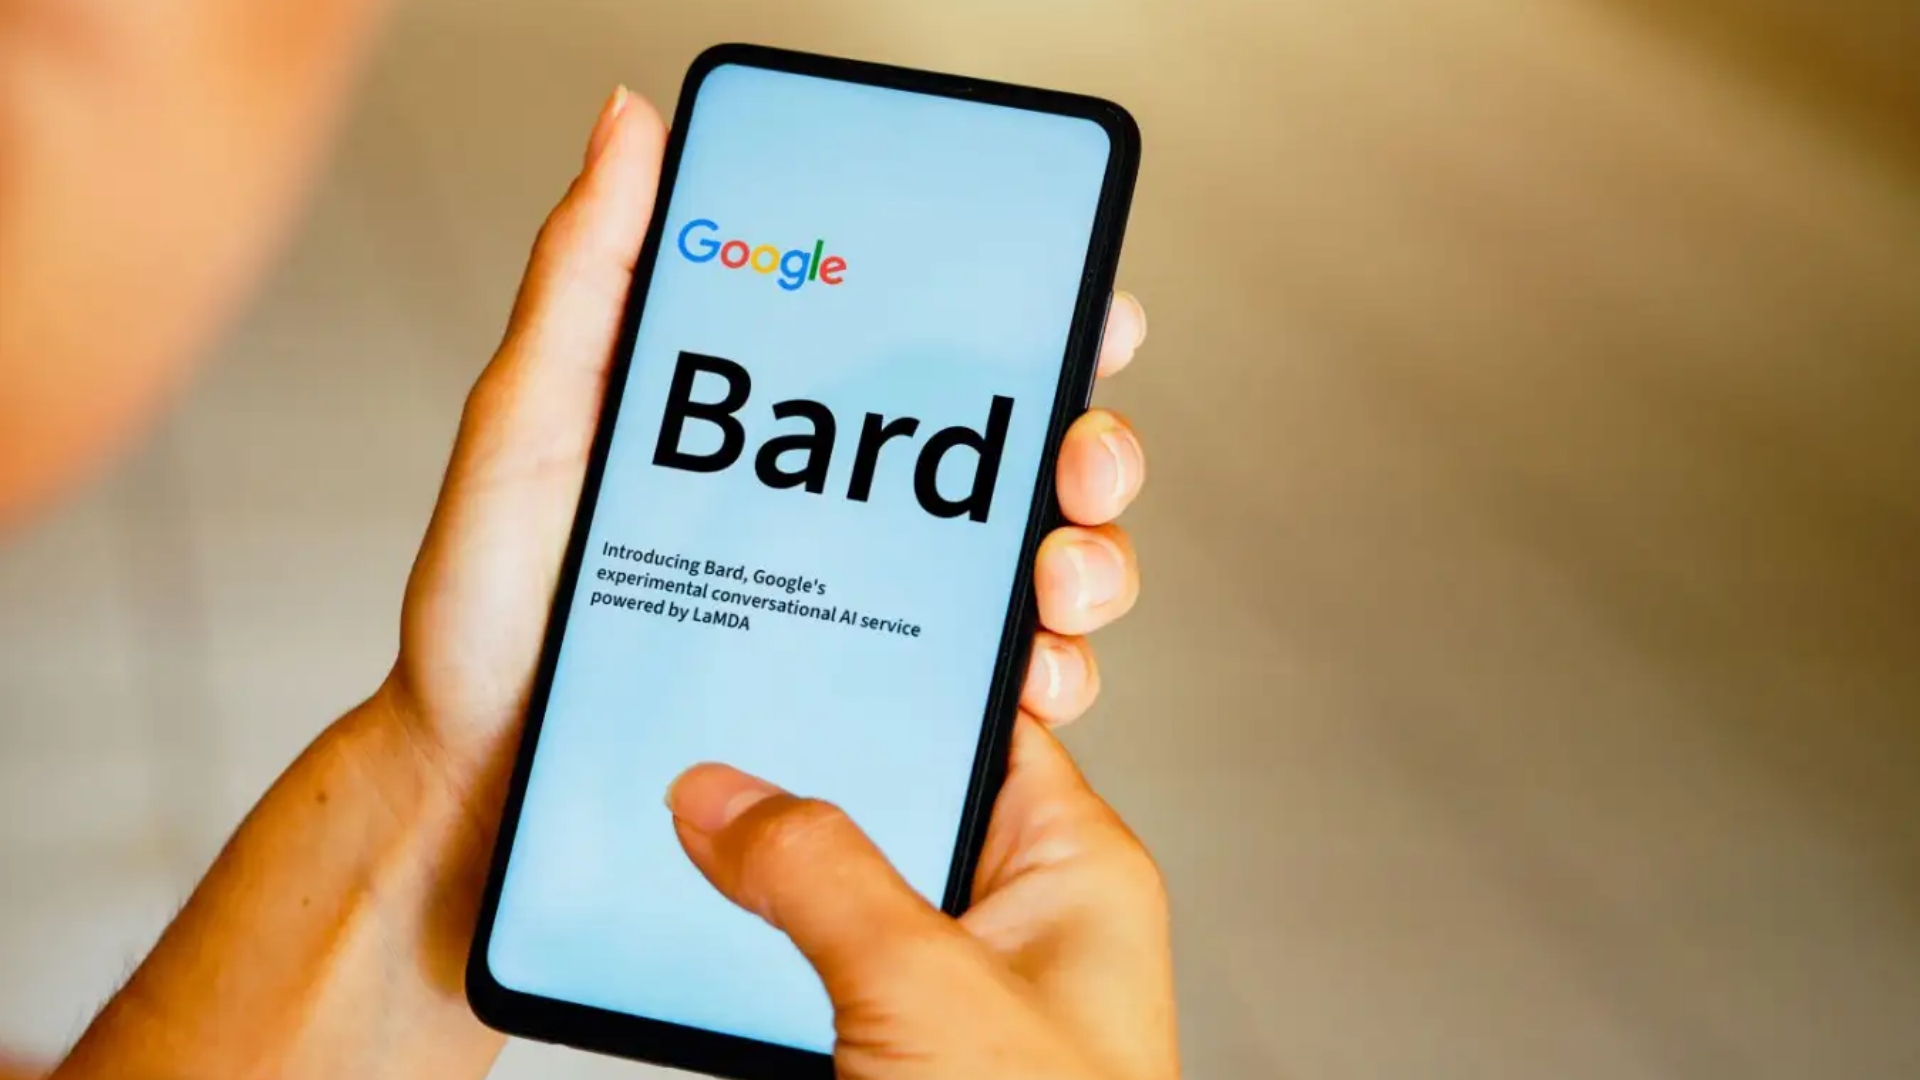 The Bard AI chatbot's plans from Google were exposed.